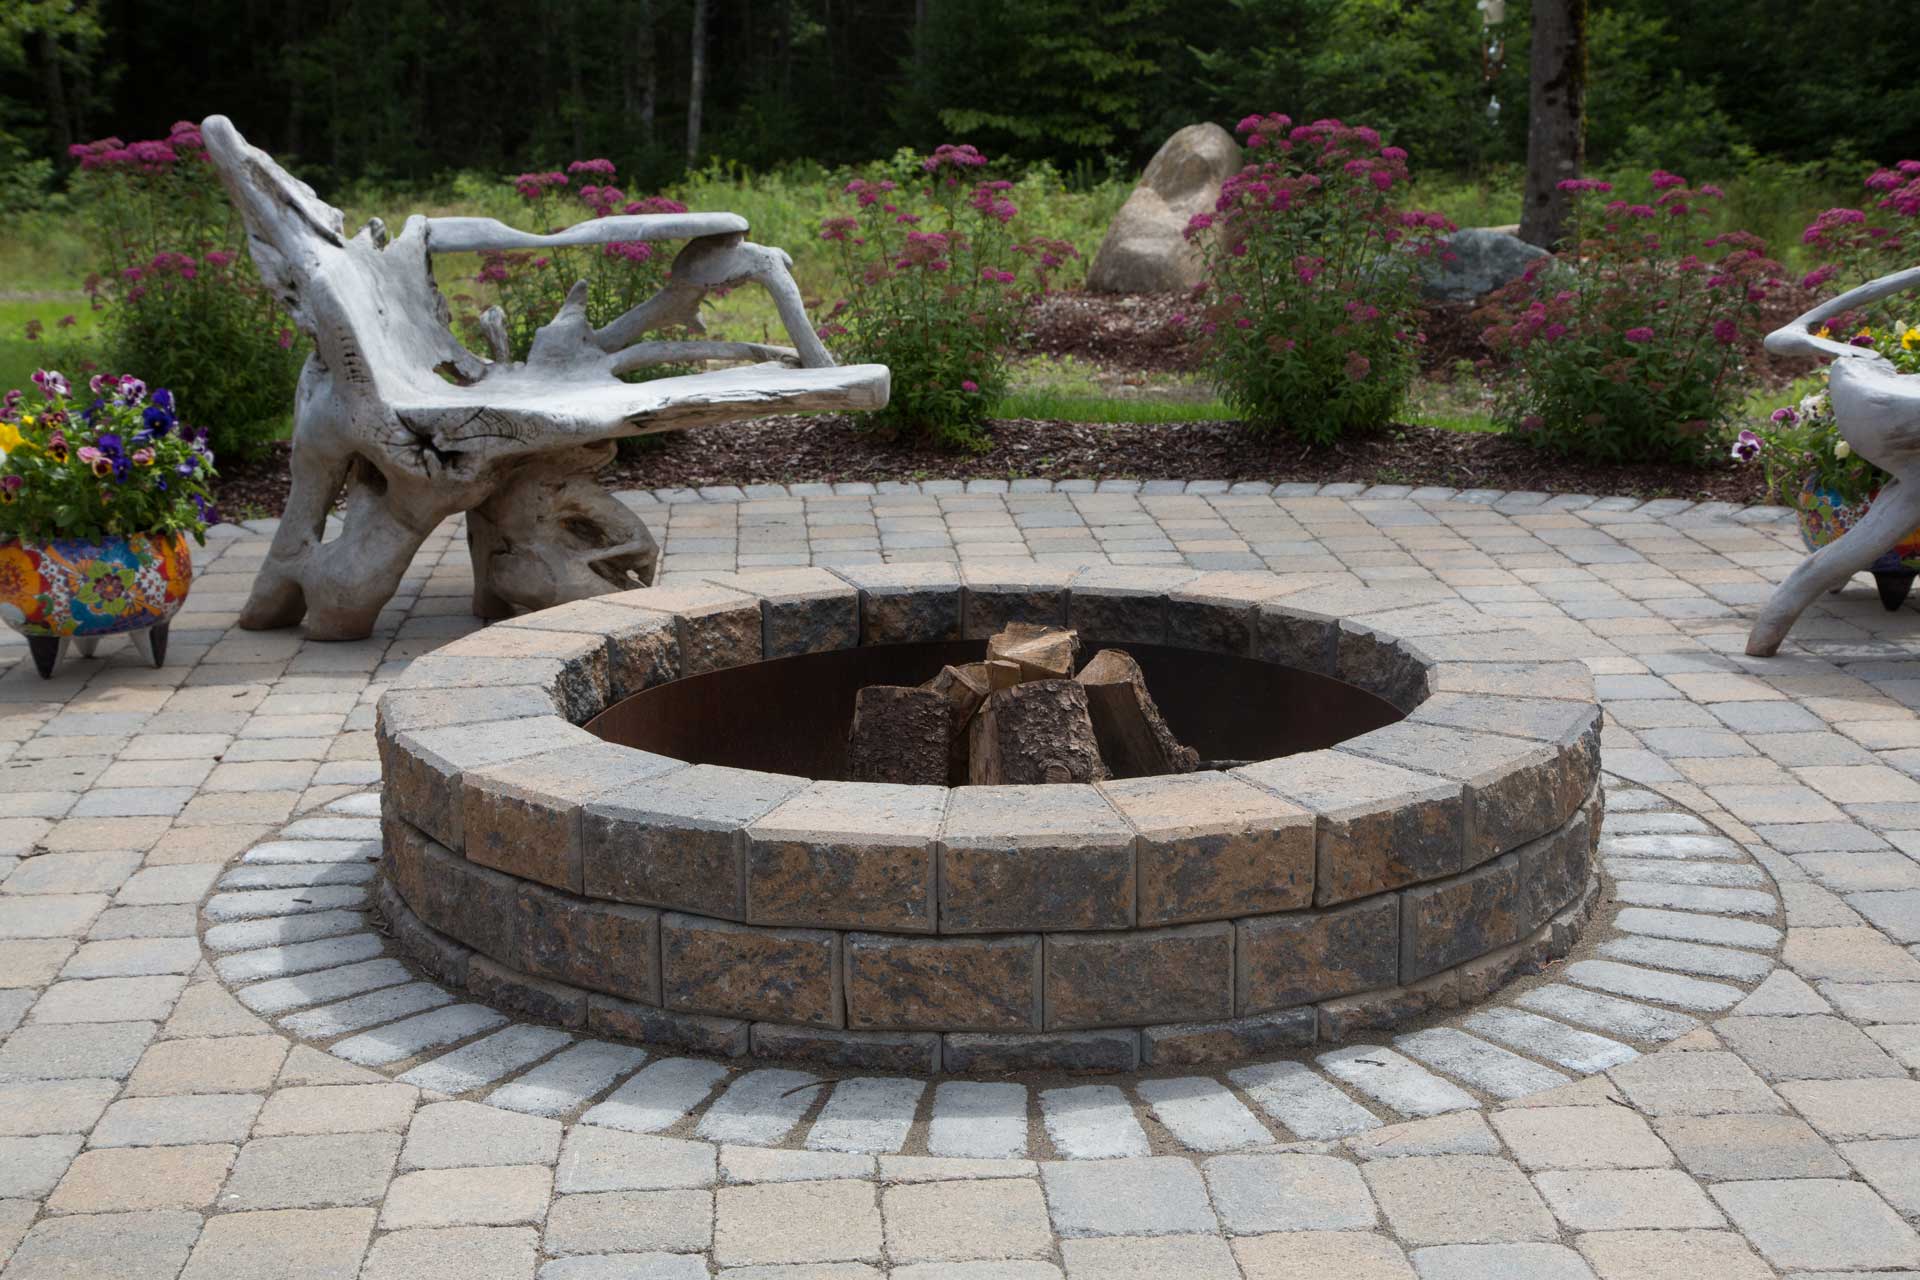 Outdoor Fire Pit Kits Canada Pits mutual stonehenge stonehedge homedepot thdstatic firepit